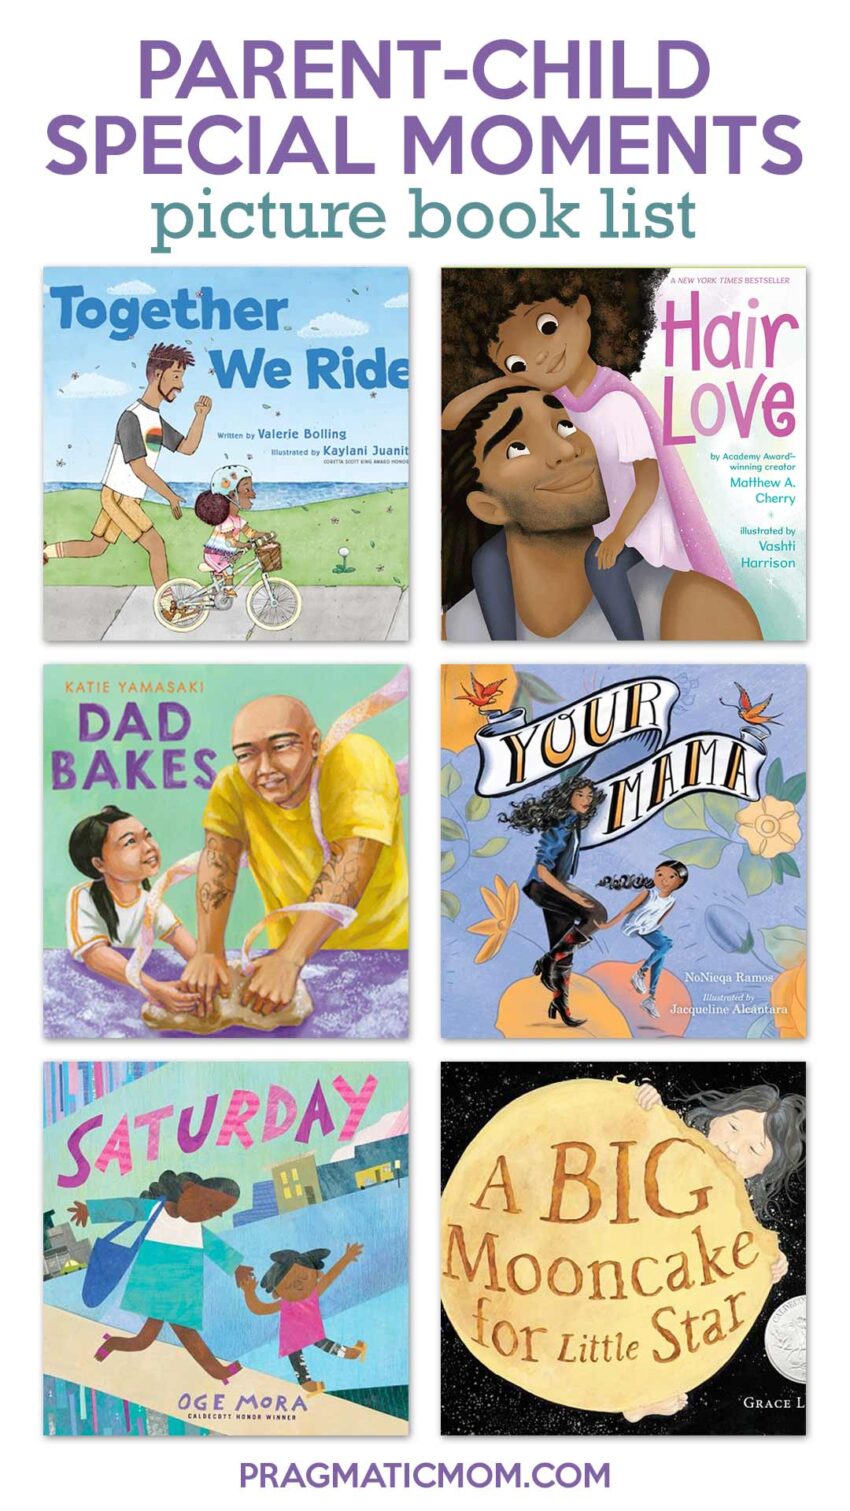 Parent-Child Special Moments Picture Book List and GIVEAWAY!